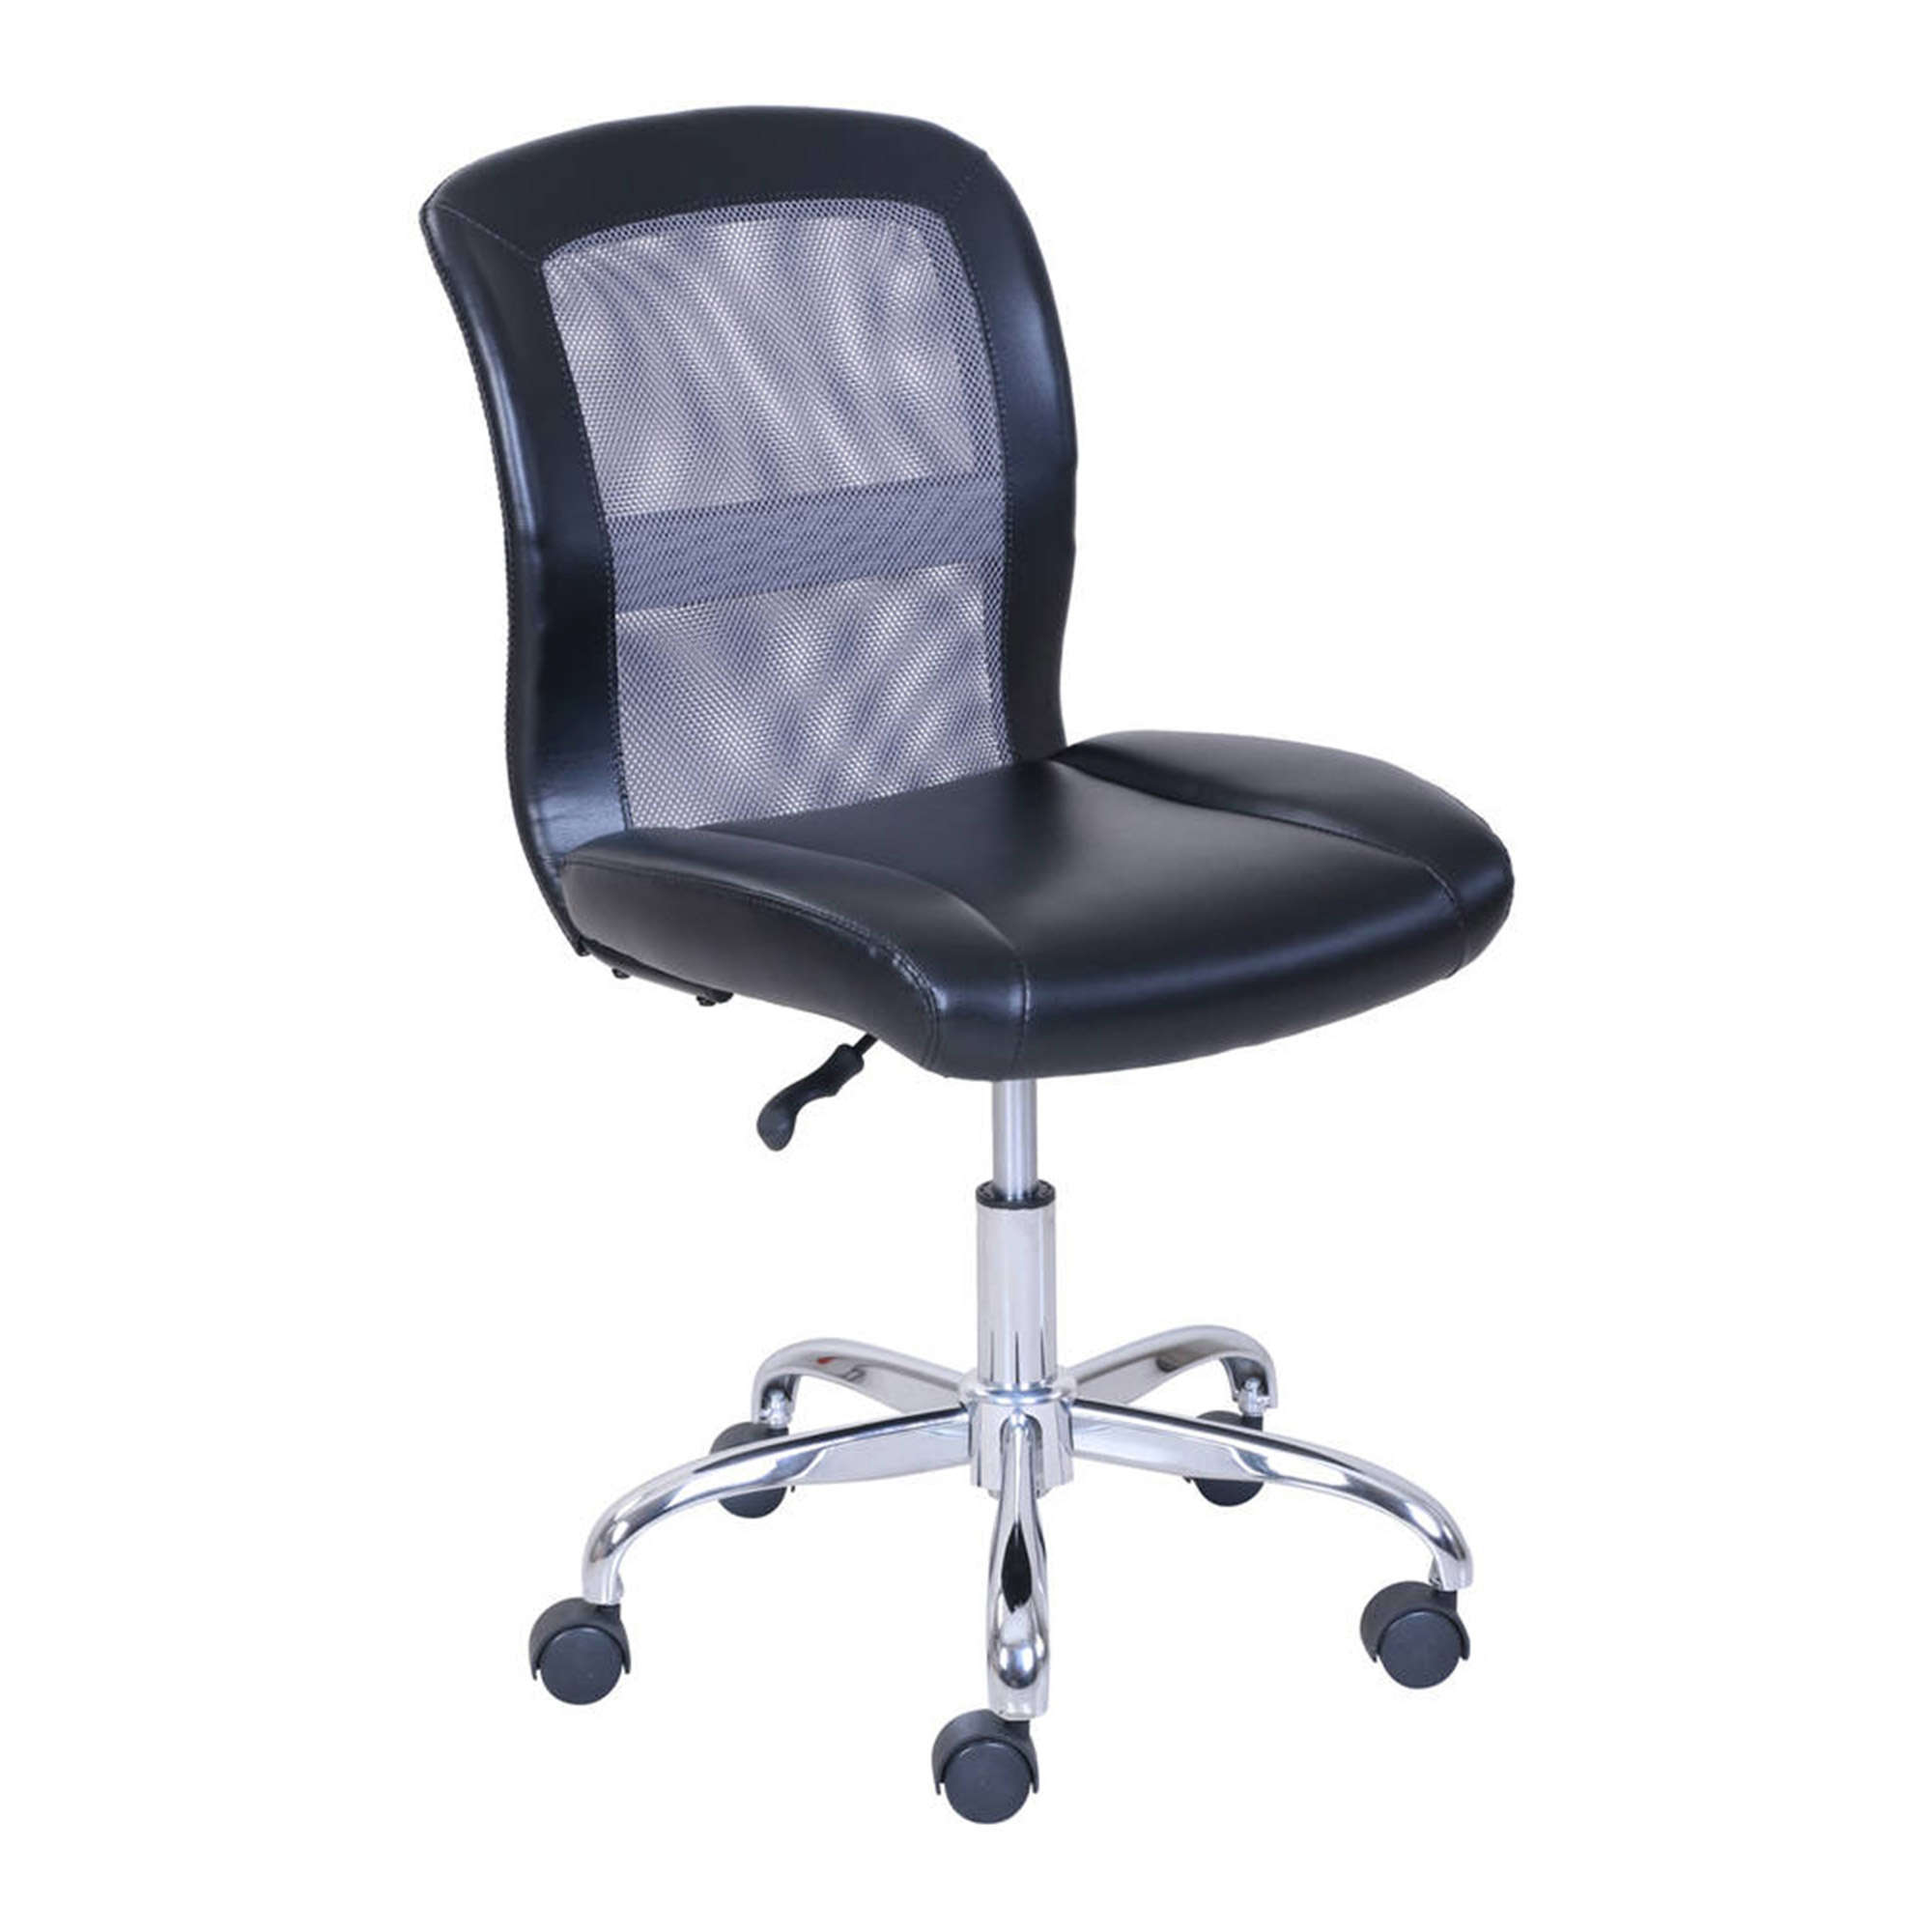 Mainstays Mid-Back, Vinyl Mesh Task Office Chair, Black and Gray - image 1 of 5